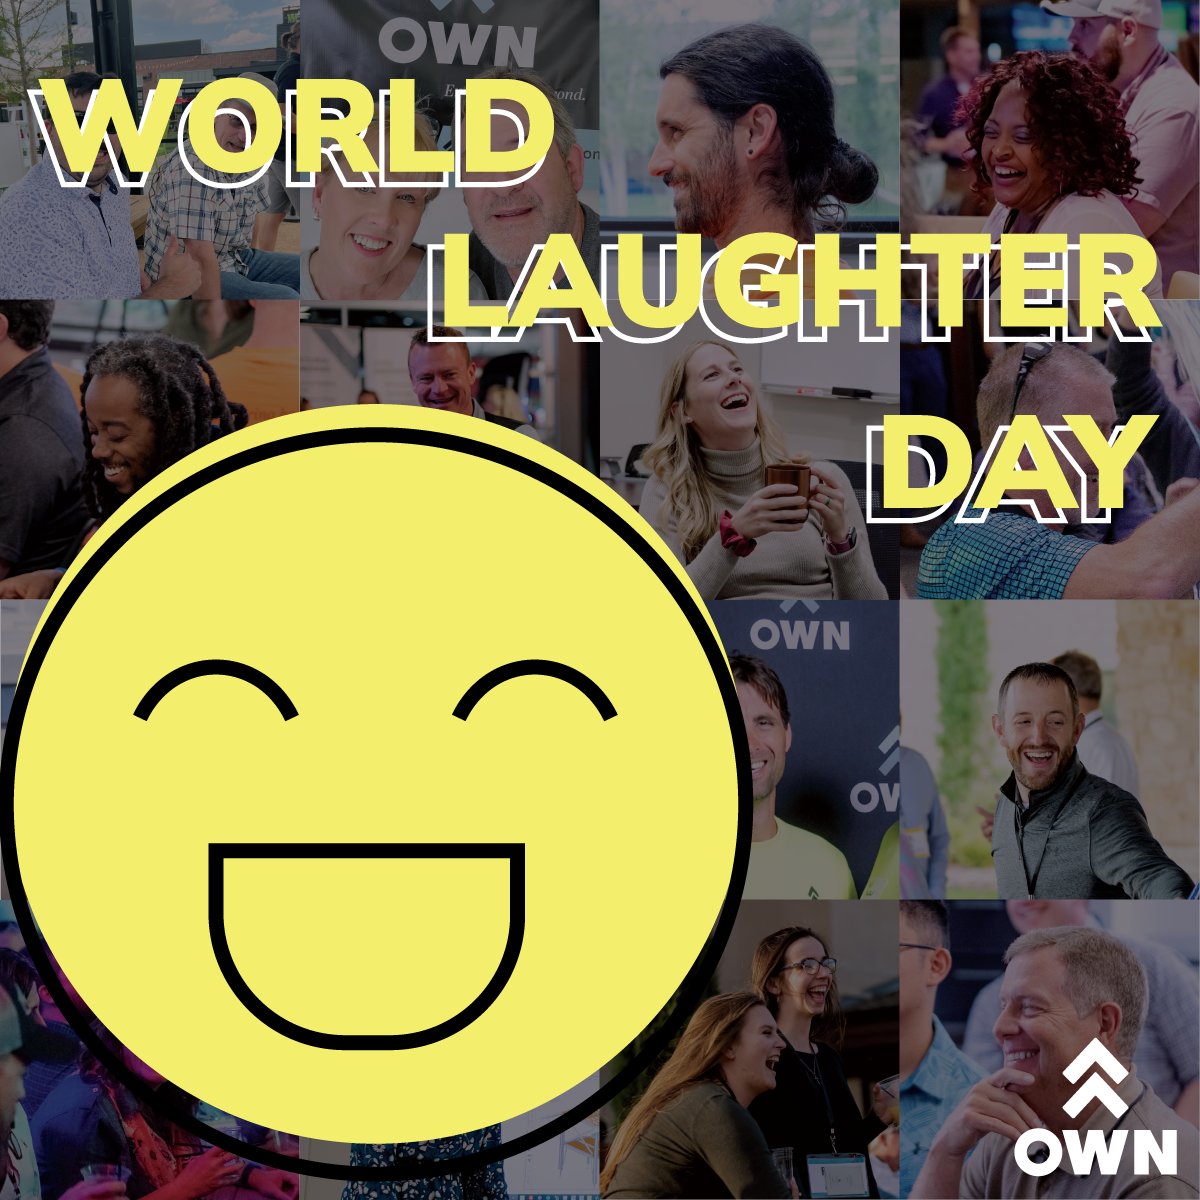 It's World Laughter Day! Today we embrace one of our favorite principles, #FunMatters (something we take very seriously here at OWN)! We hope you'll join us in having some good laughs today and every day. #WorldLaughterDay #WeAreOWN #ForTheLaughs